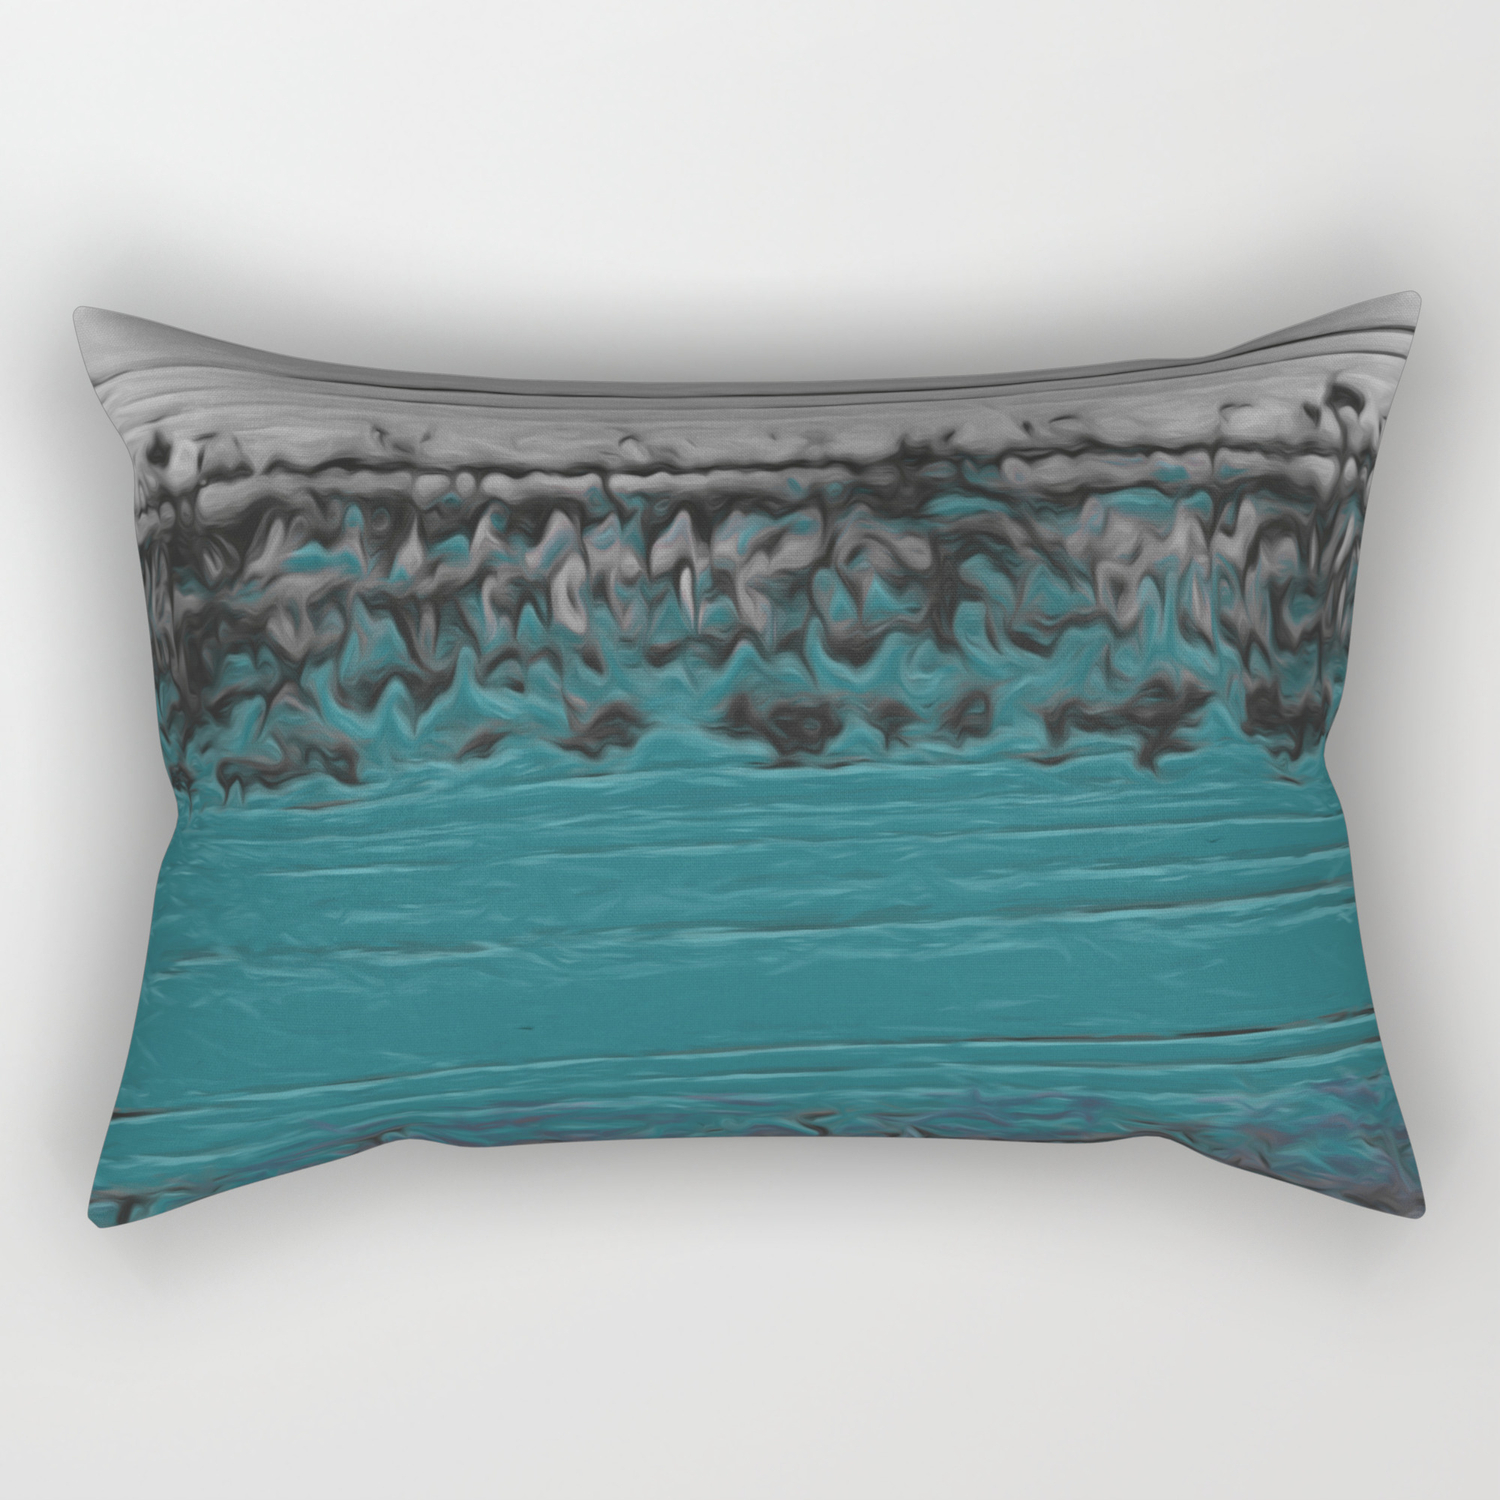 teal and gray pillows